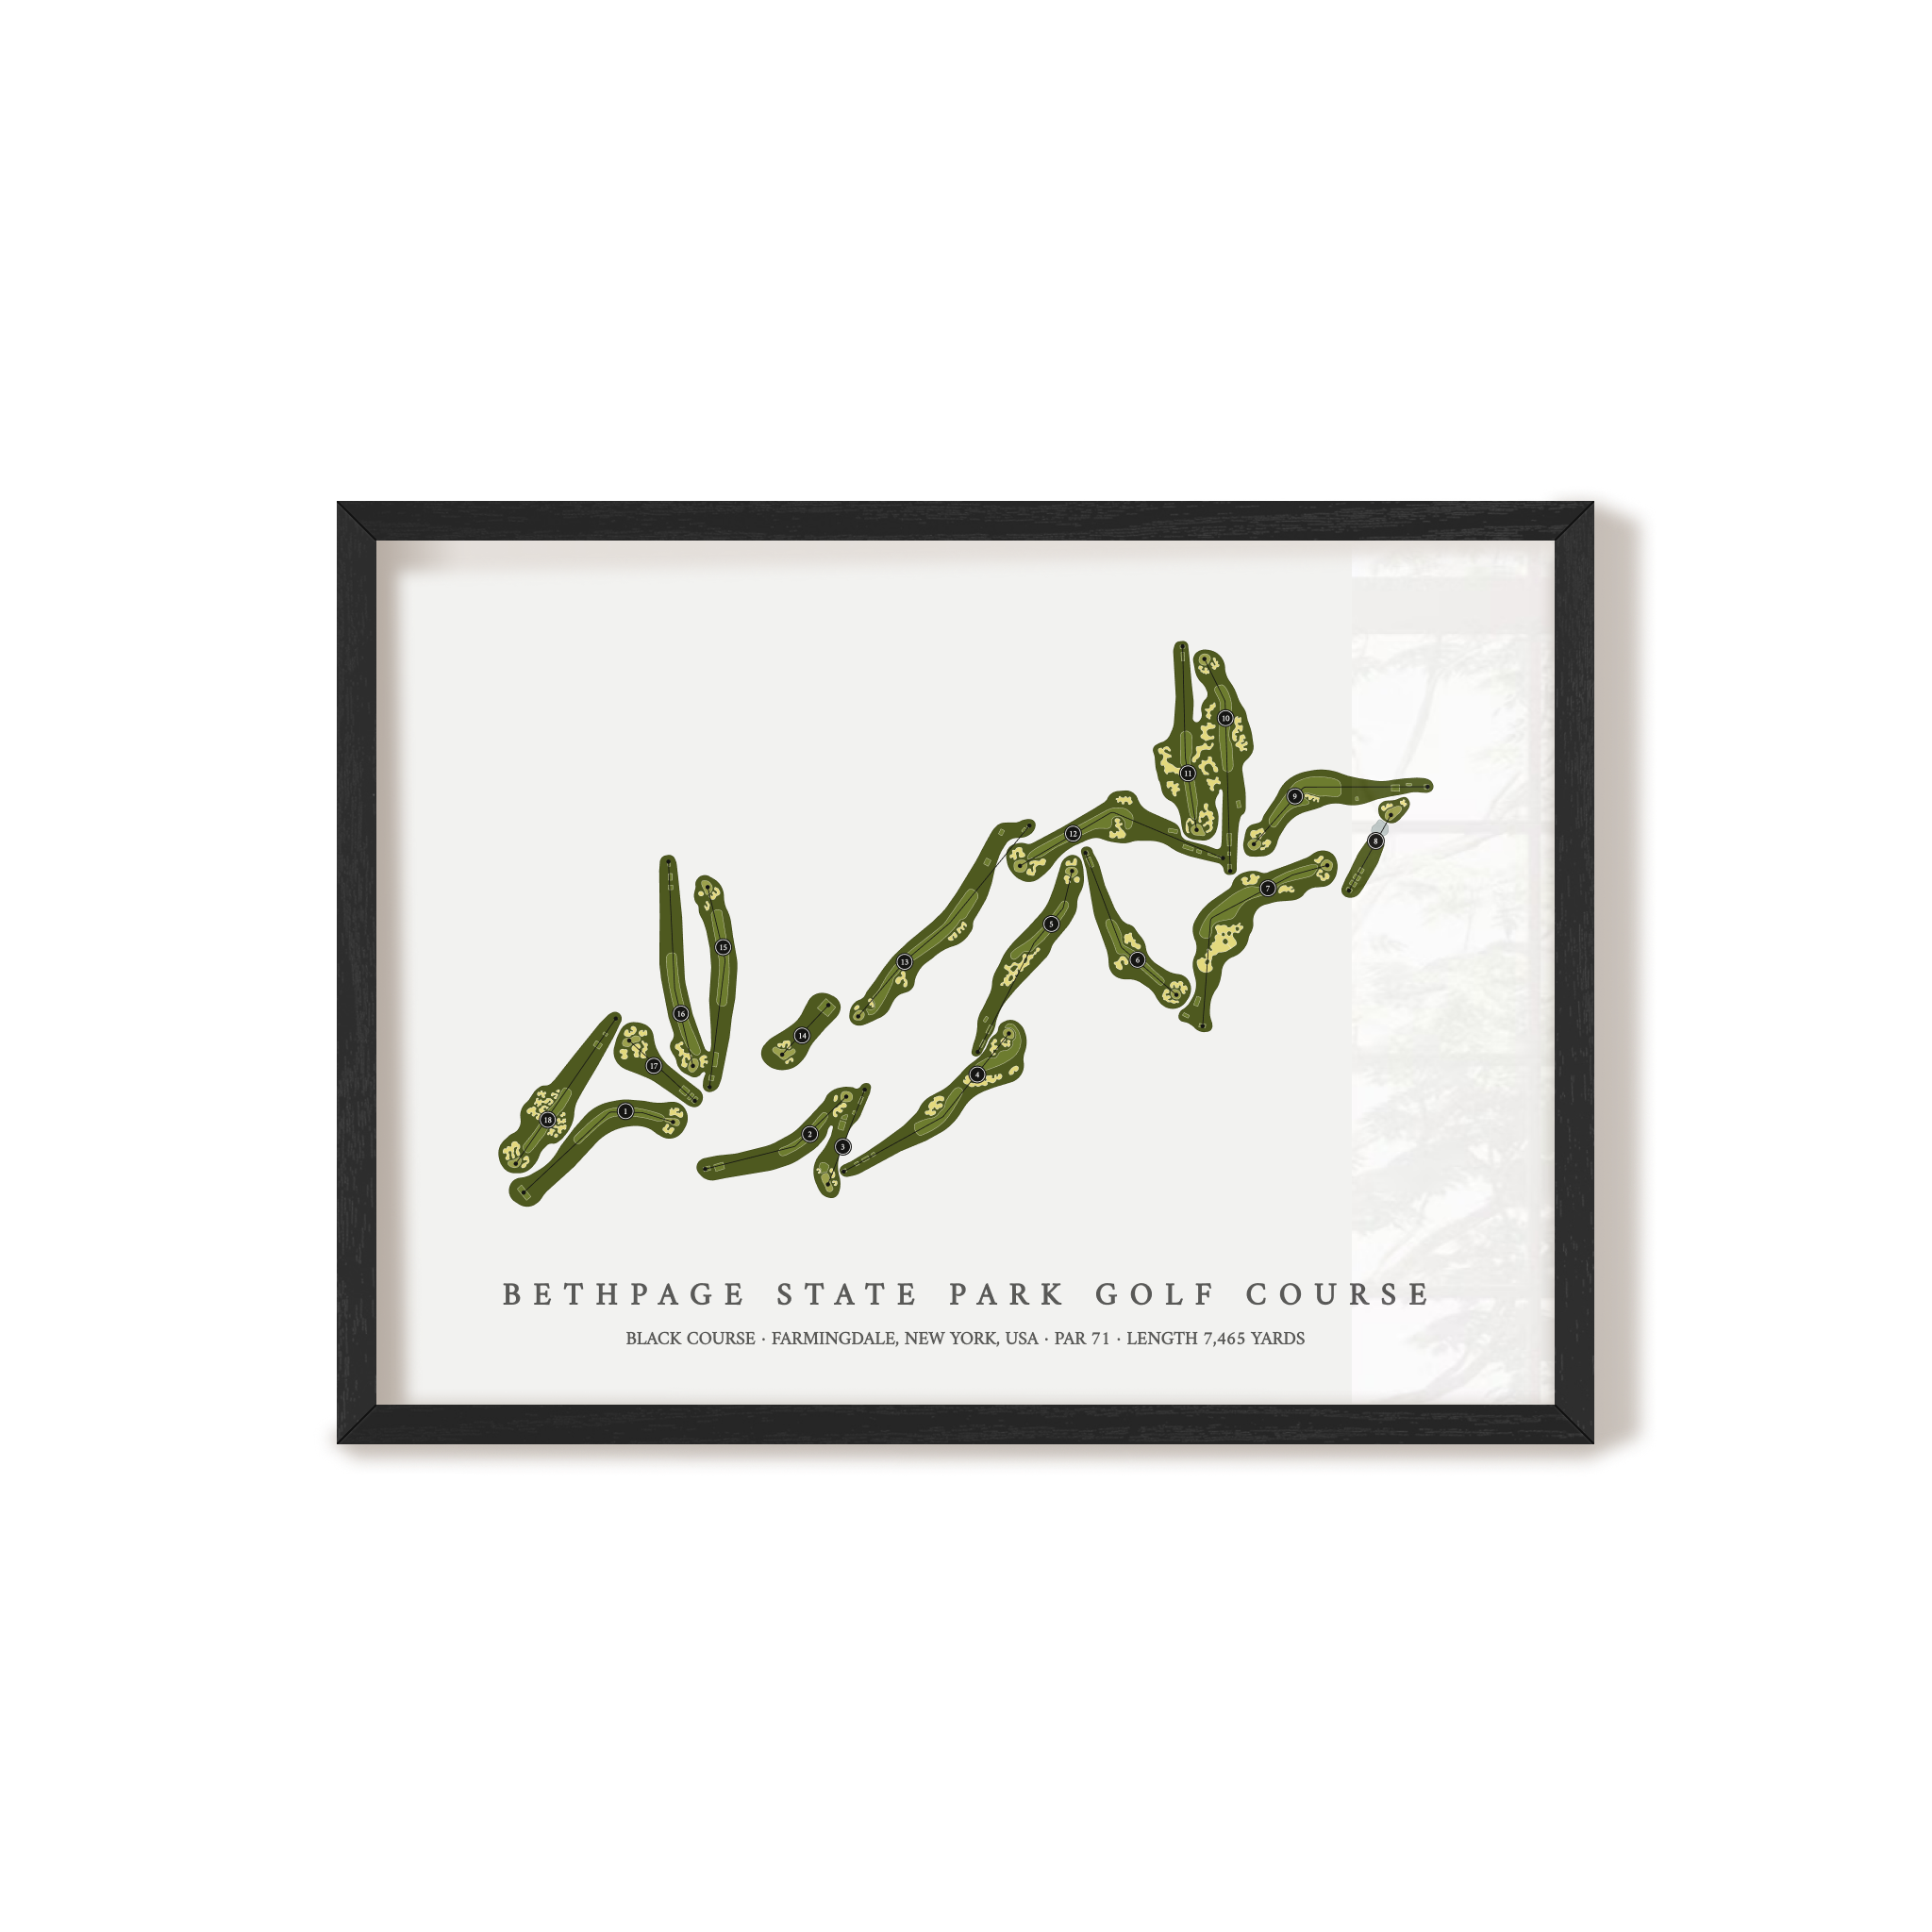 Bethpage State Park Golf Course - Black Course | Golf Course Print | Black Frame 